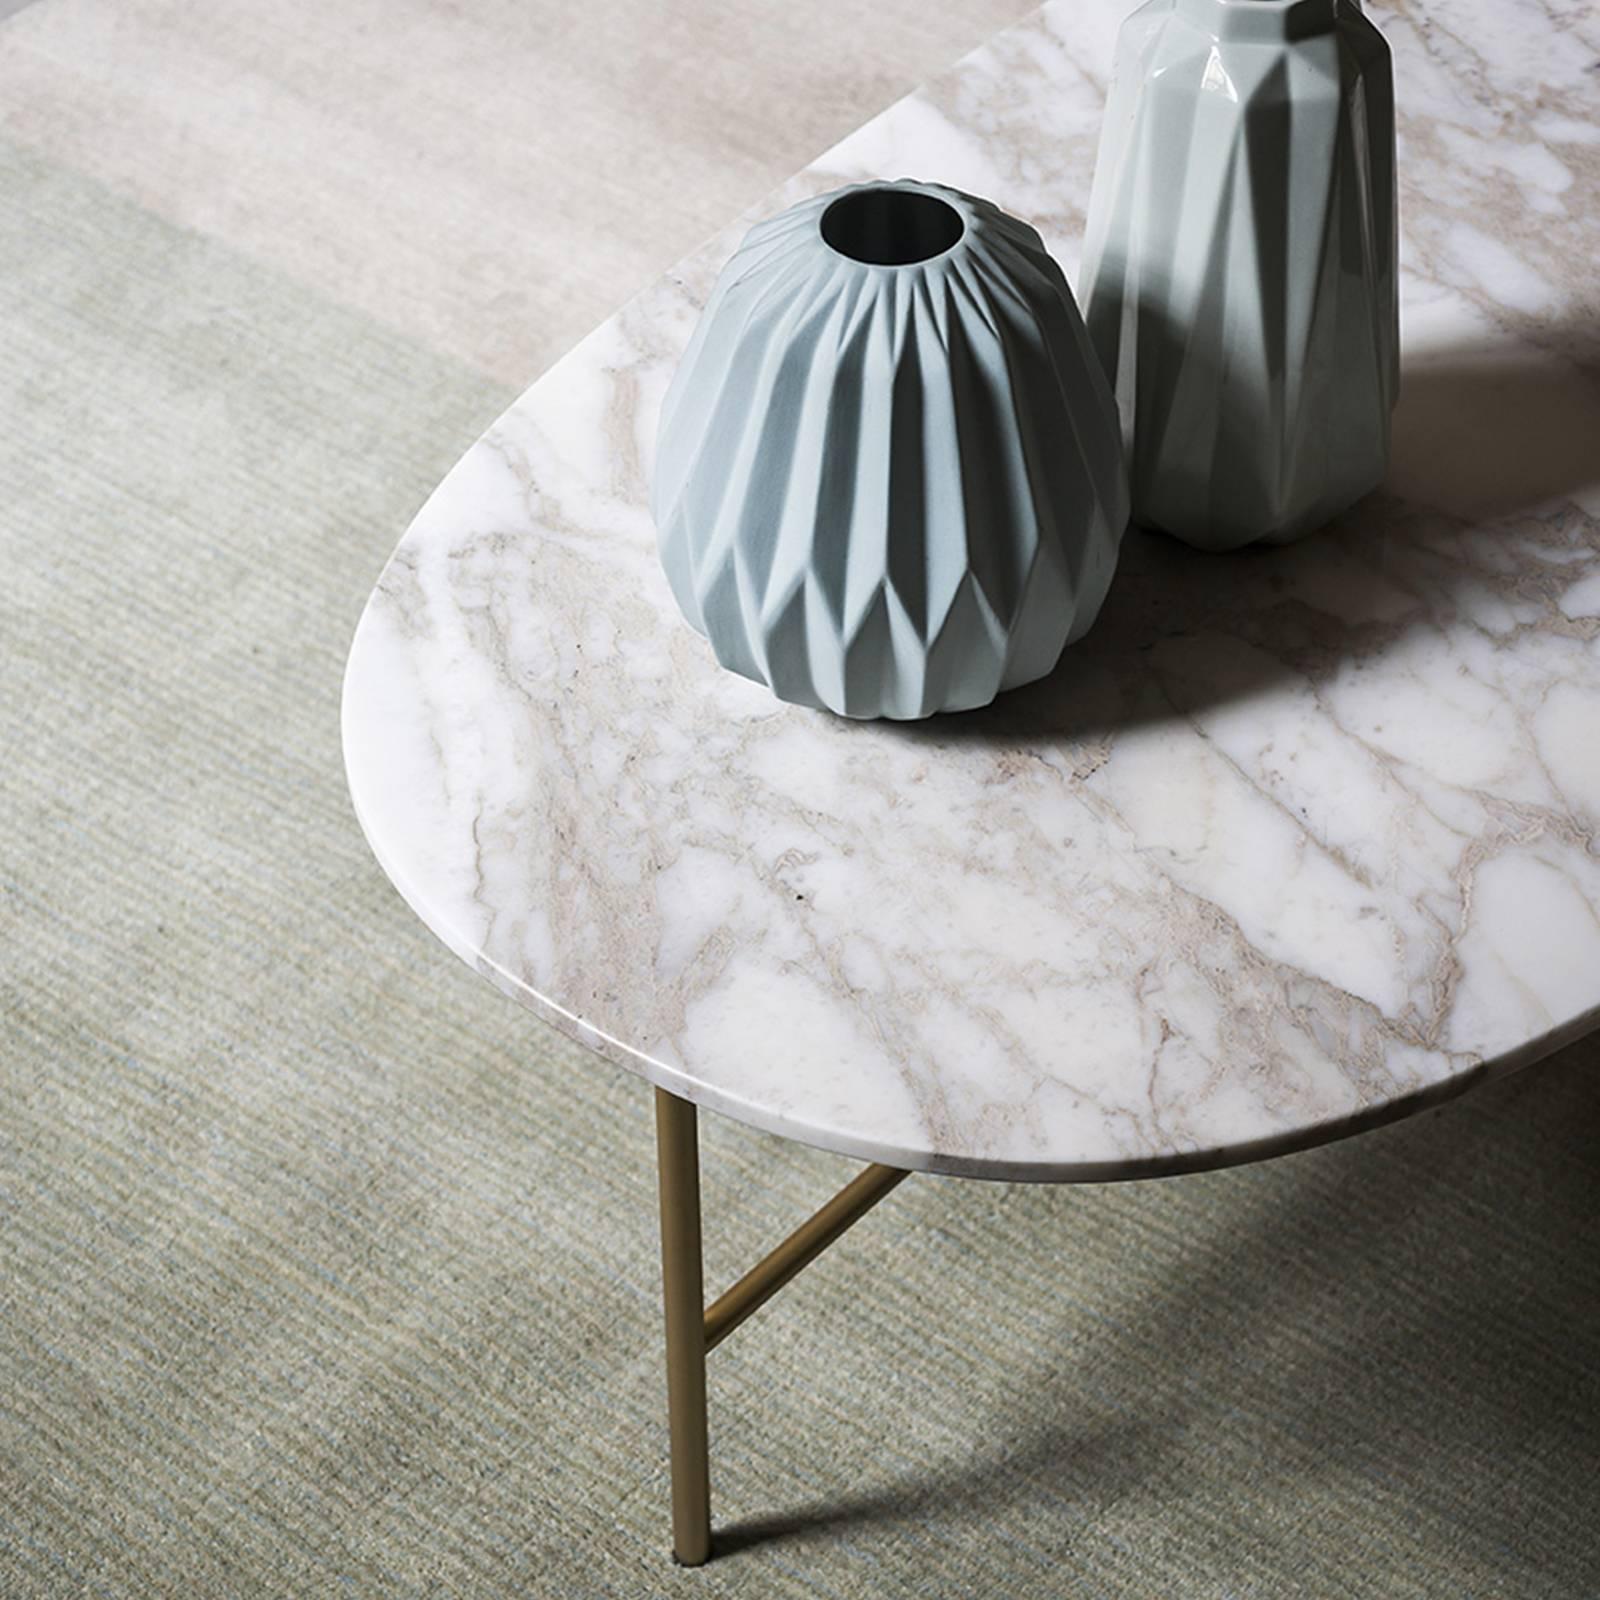 This elegant and minimalist coffee table was designed by Gordon Guillaumier and is part of the Soap collection. The elegance of Calacatta marble is the standout element of this piece that features a rigorous base, made of metal elements with a gold